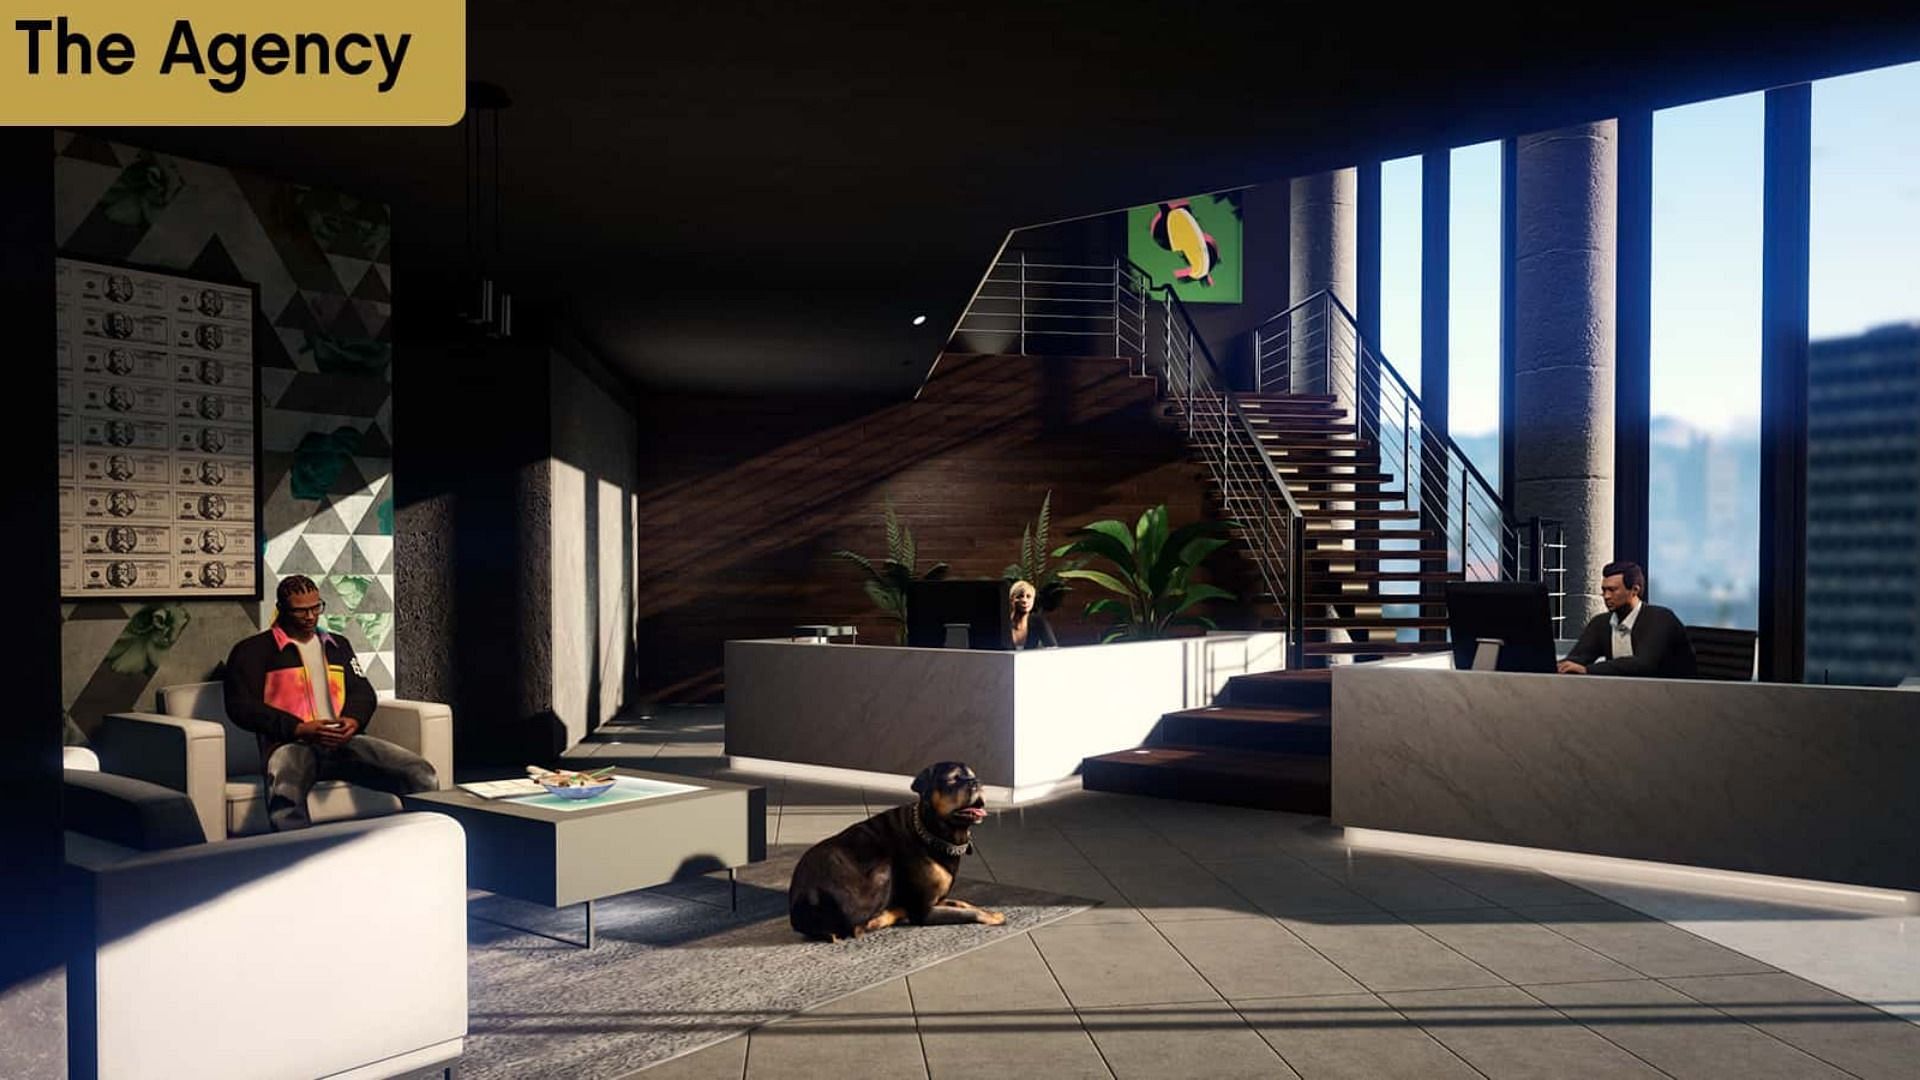 One of the snapshots of the Agency building in GTA Online (Image via Rockstar Games)